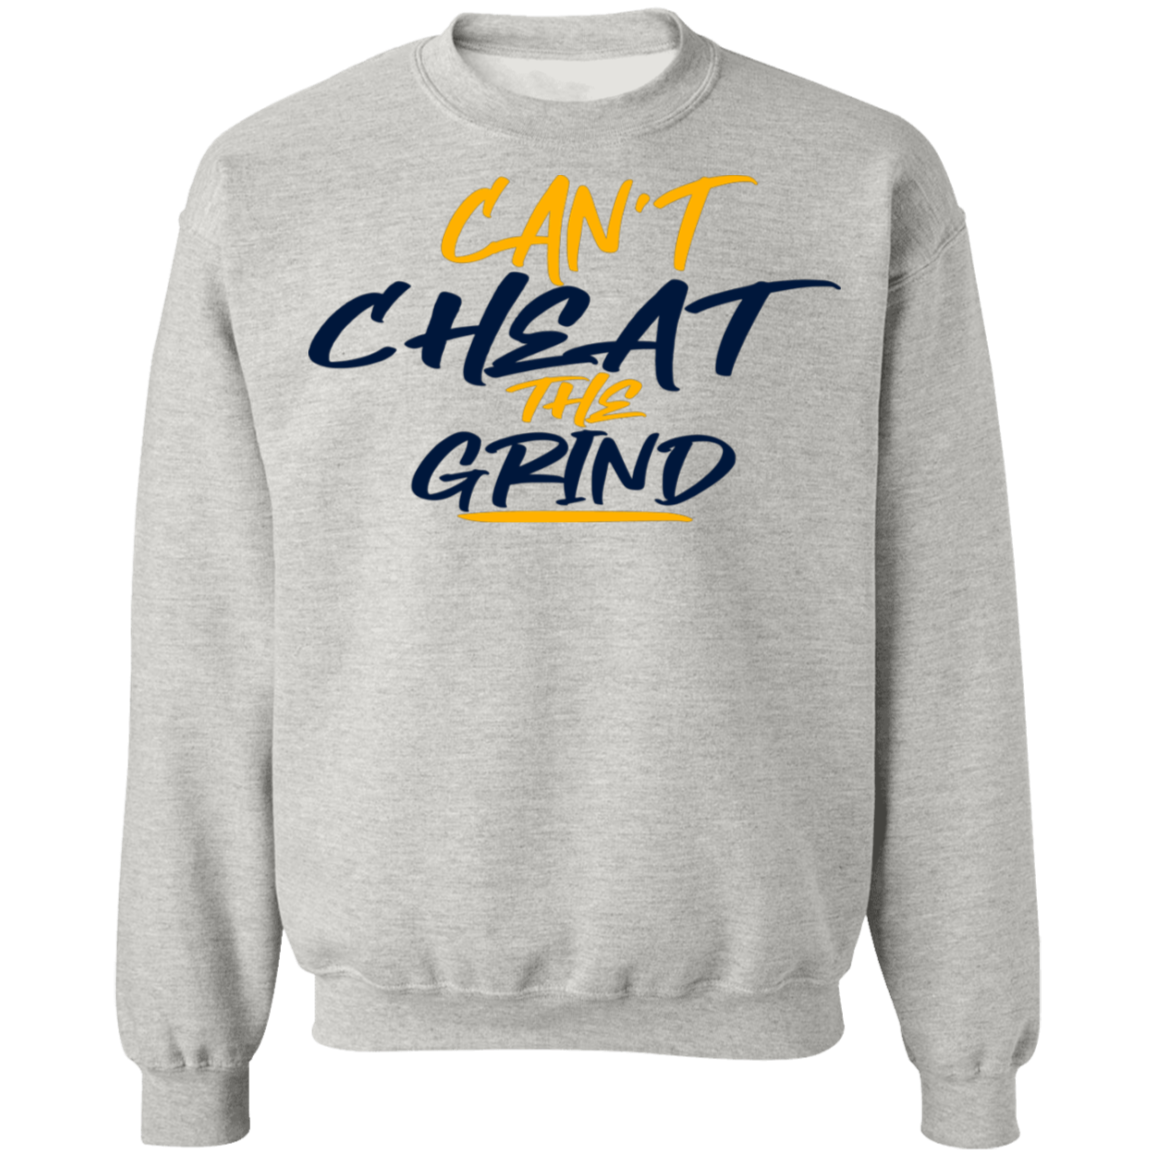 Can't cheat the grind color Z65 Crewneck Pullover Sweatshirt